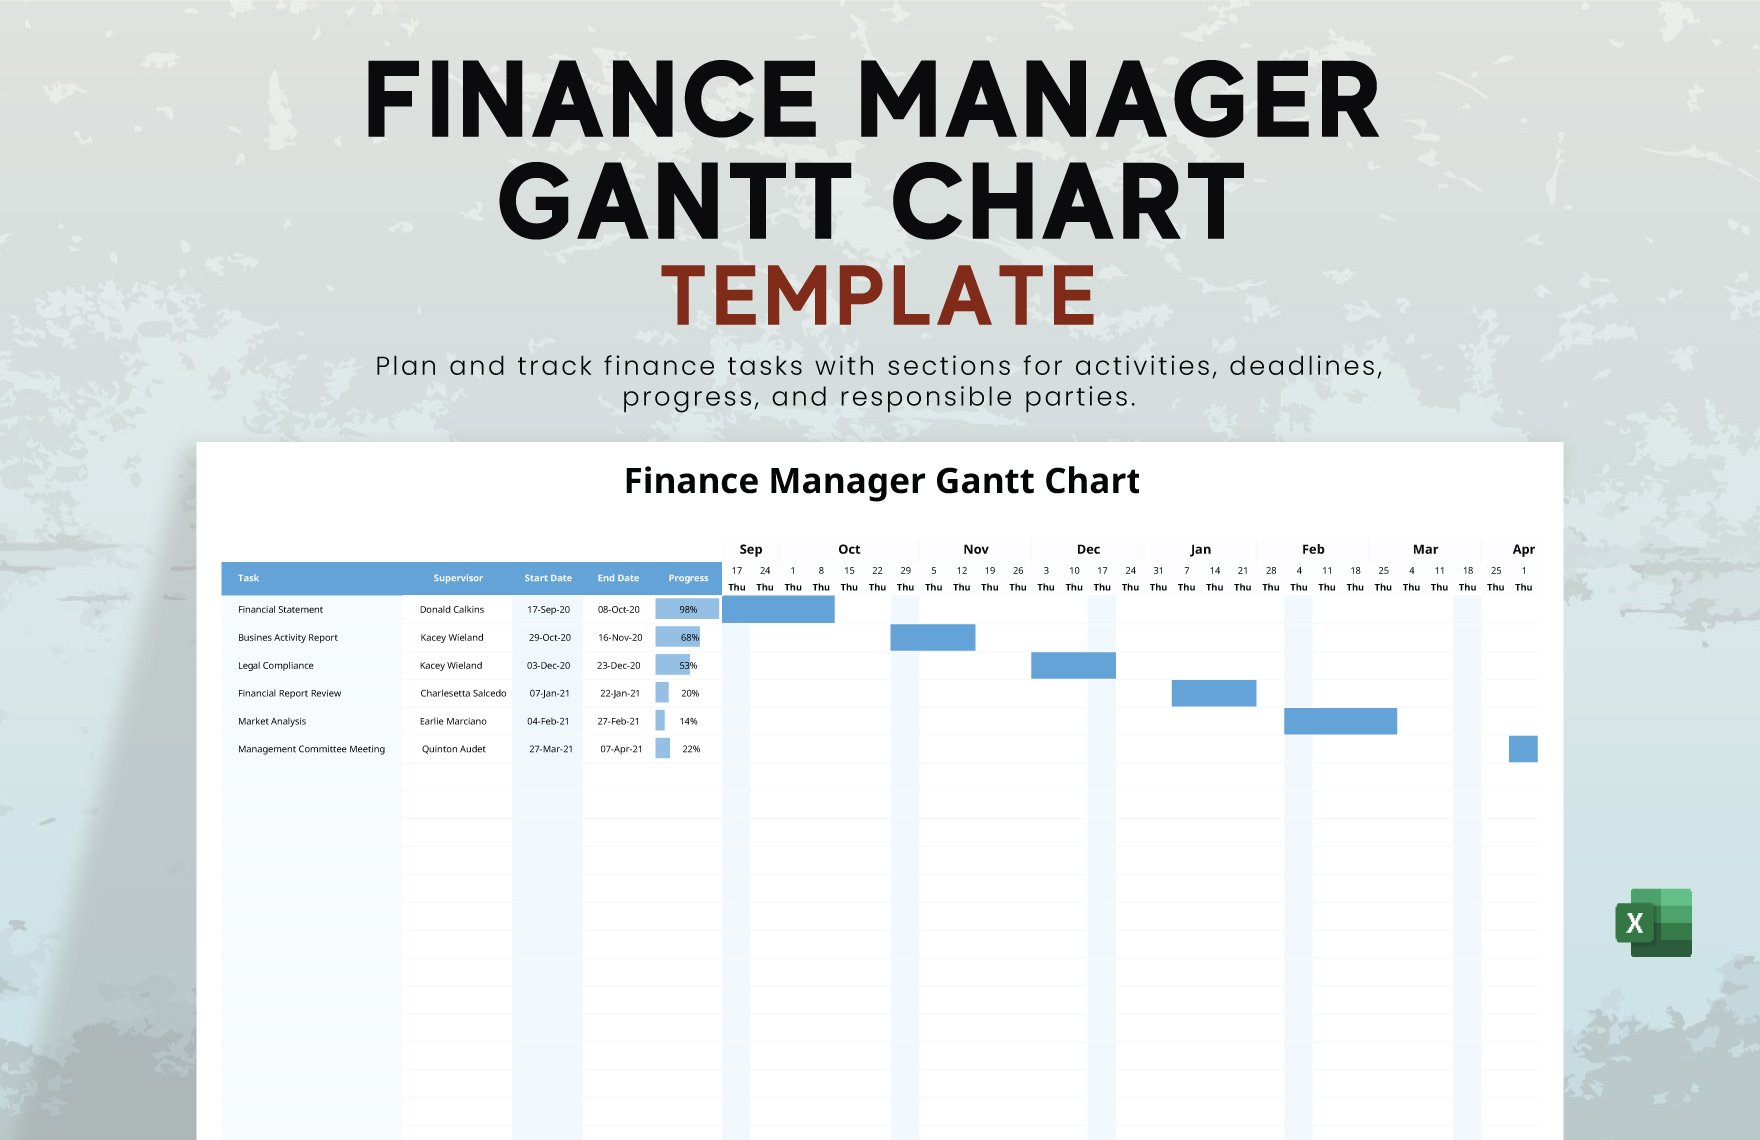 Finance Manager Gantt Chart Template in Excel